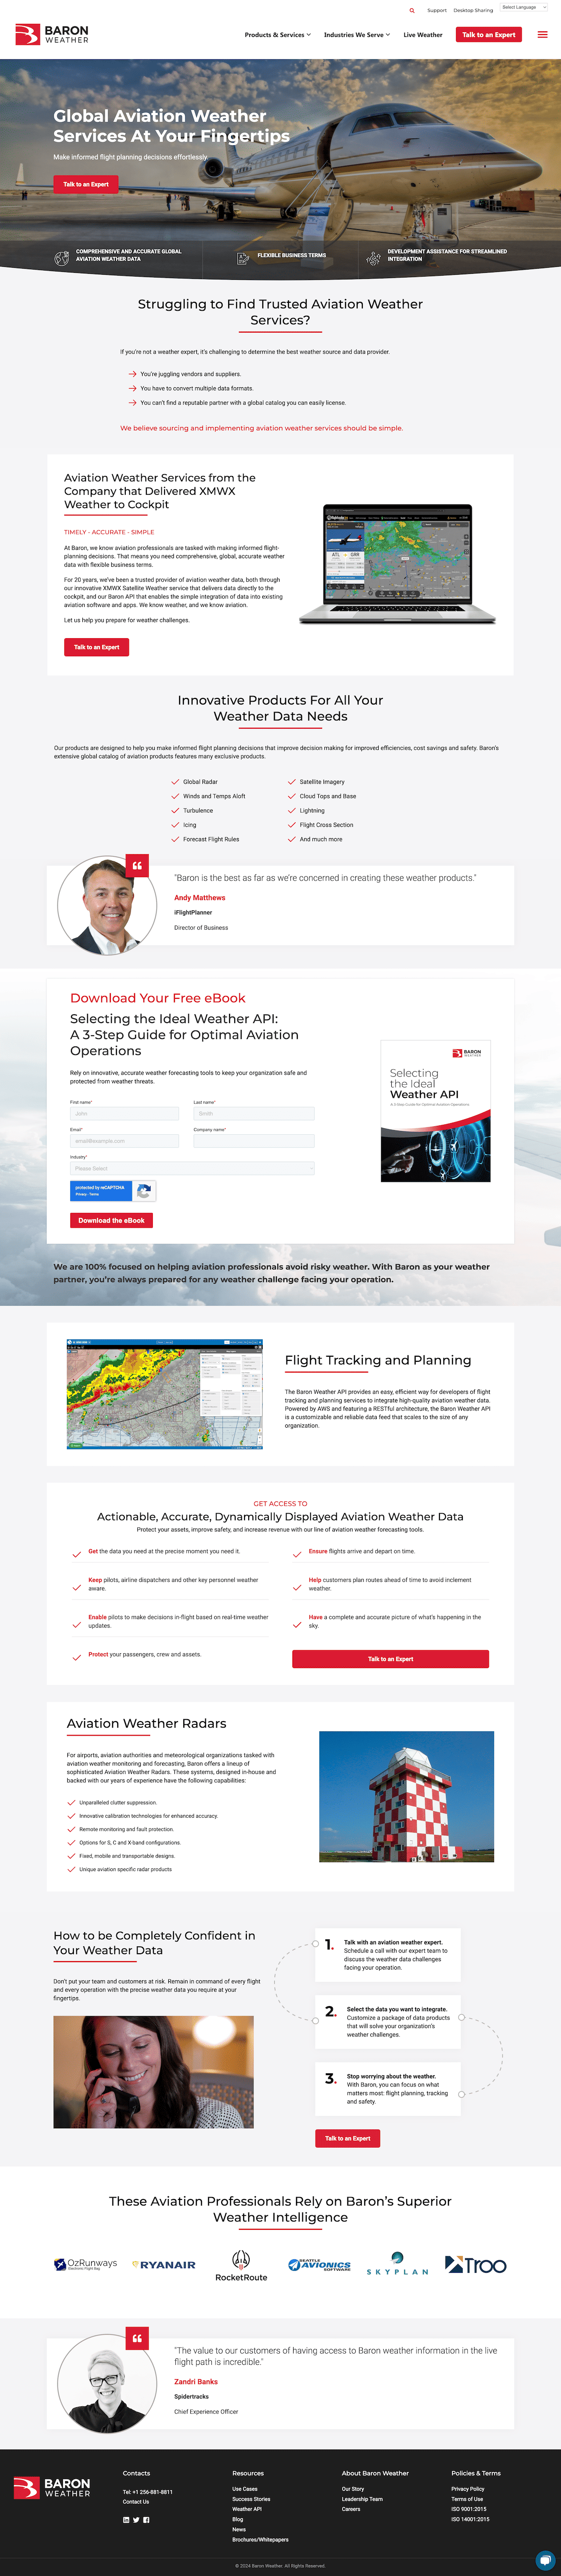 screenshot of baronweather.com new aviation industry page